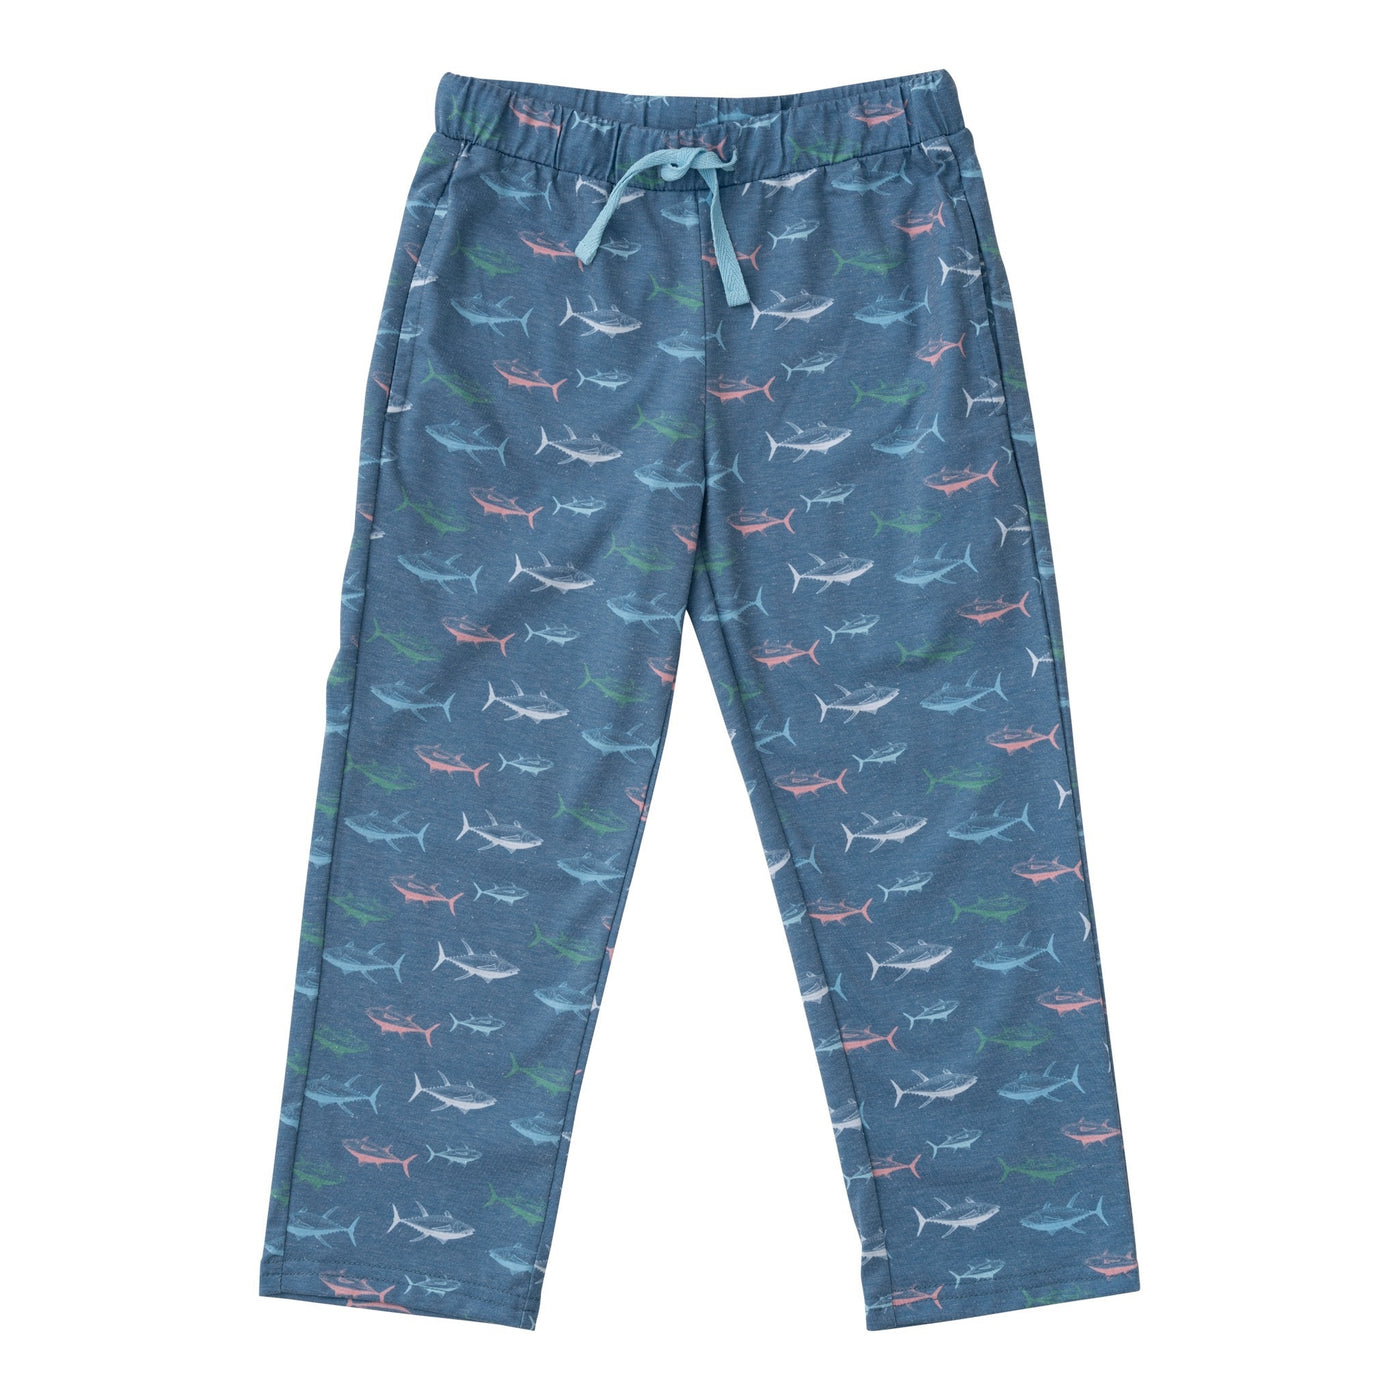 Lounge Life Pants - Ethereal Blue Striped Bass